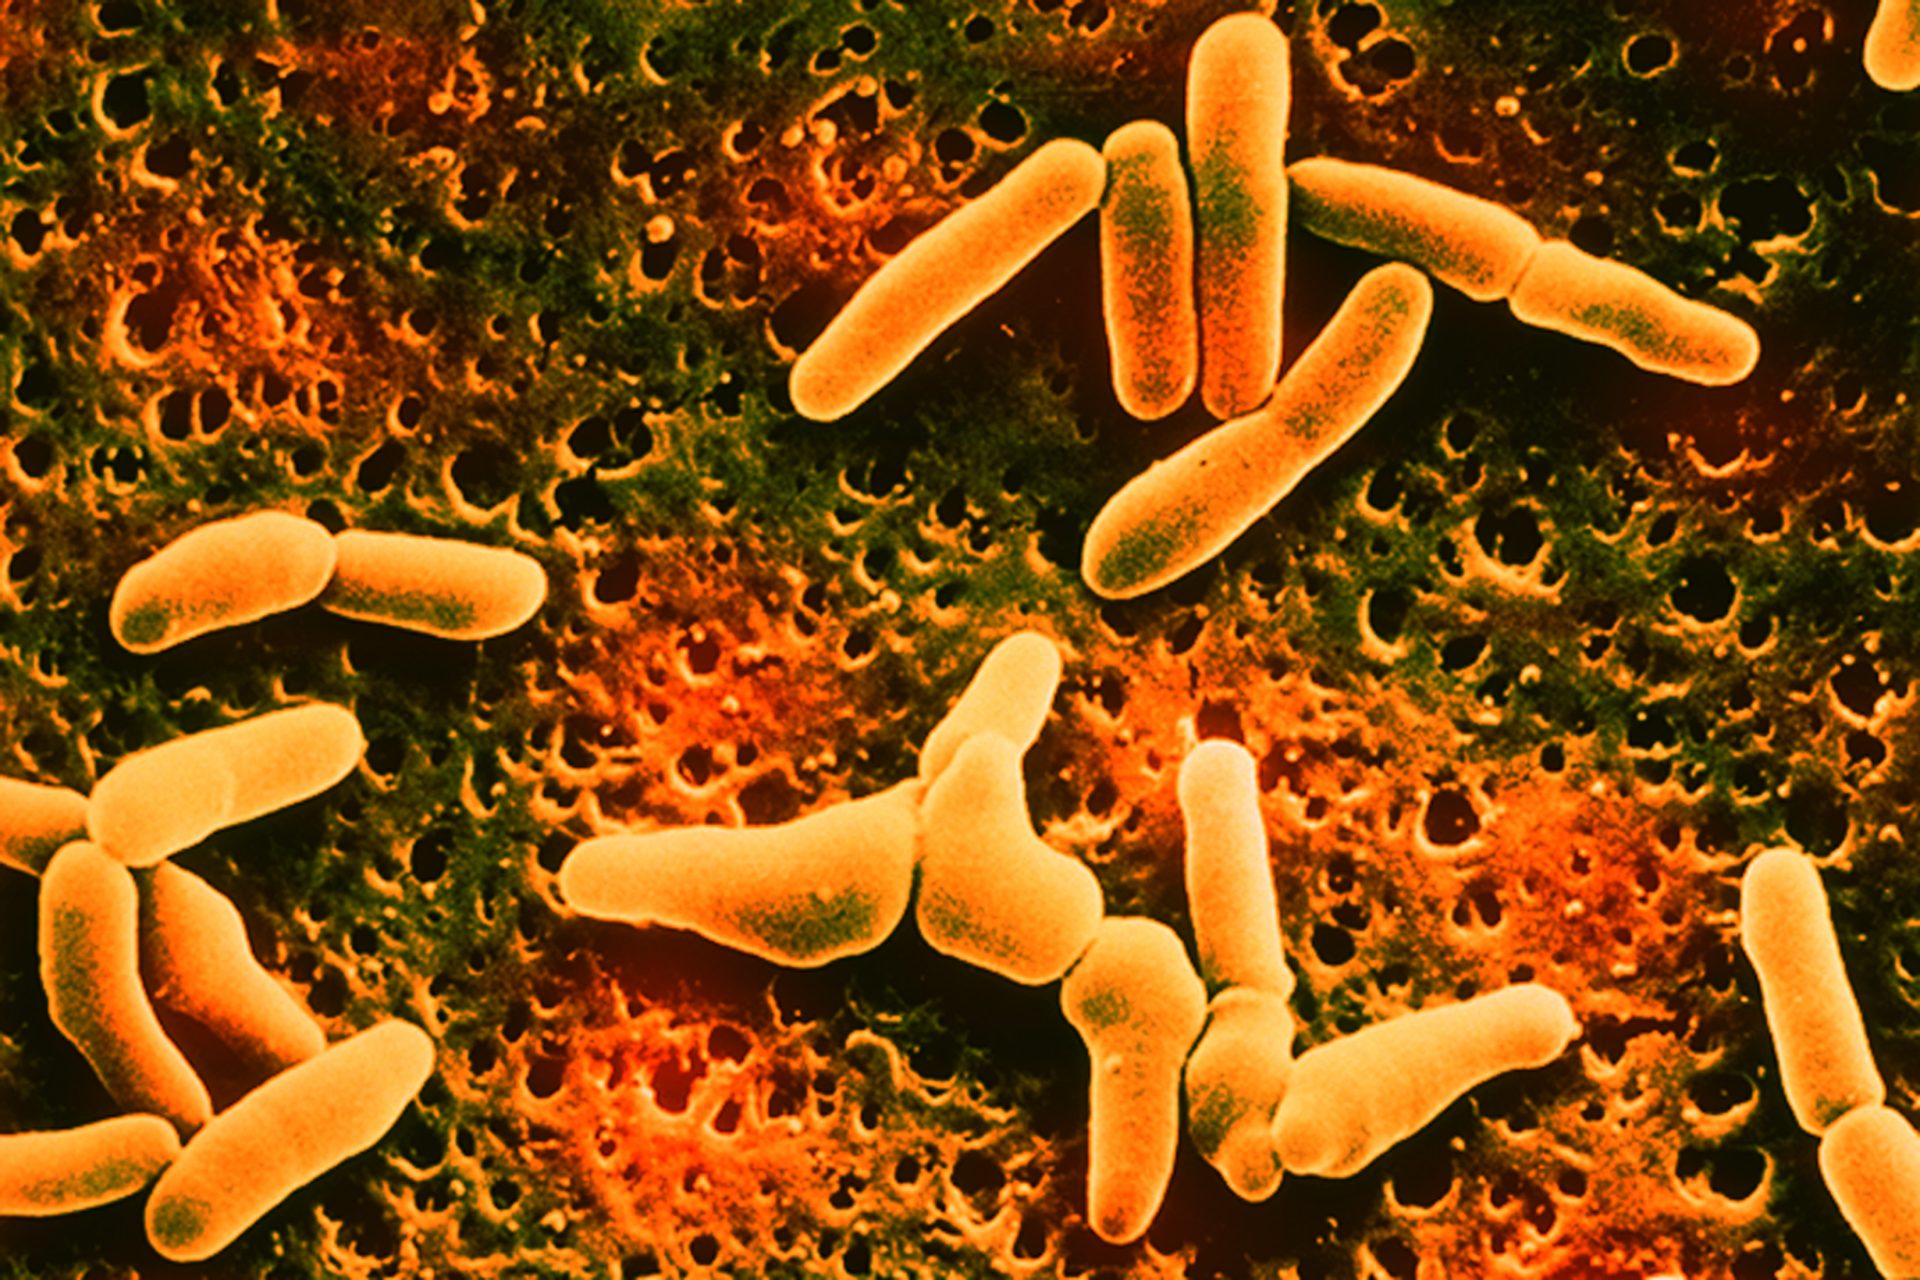 Recent Listeria Outbreak Leaves One Person Dead And 22 Hospitalized With Most Cases Originating In Florida